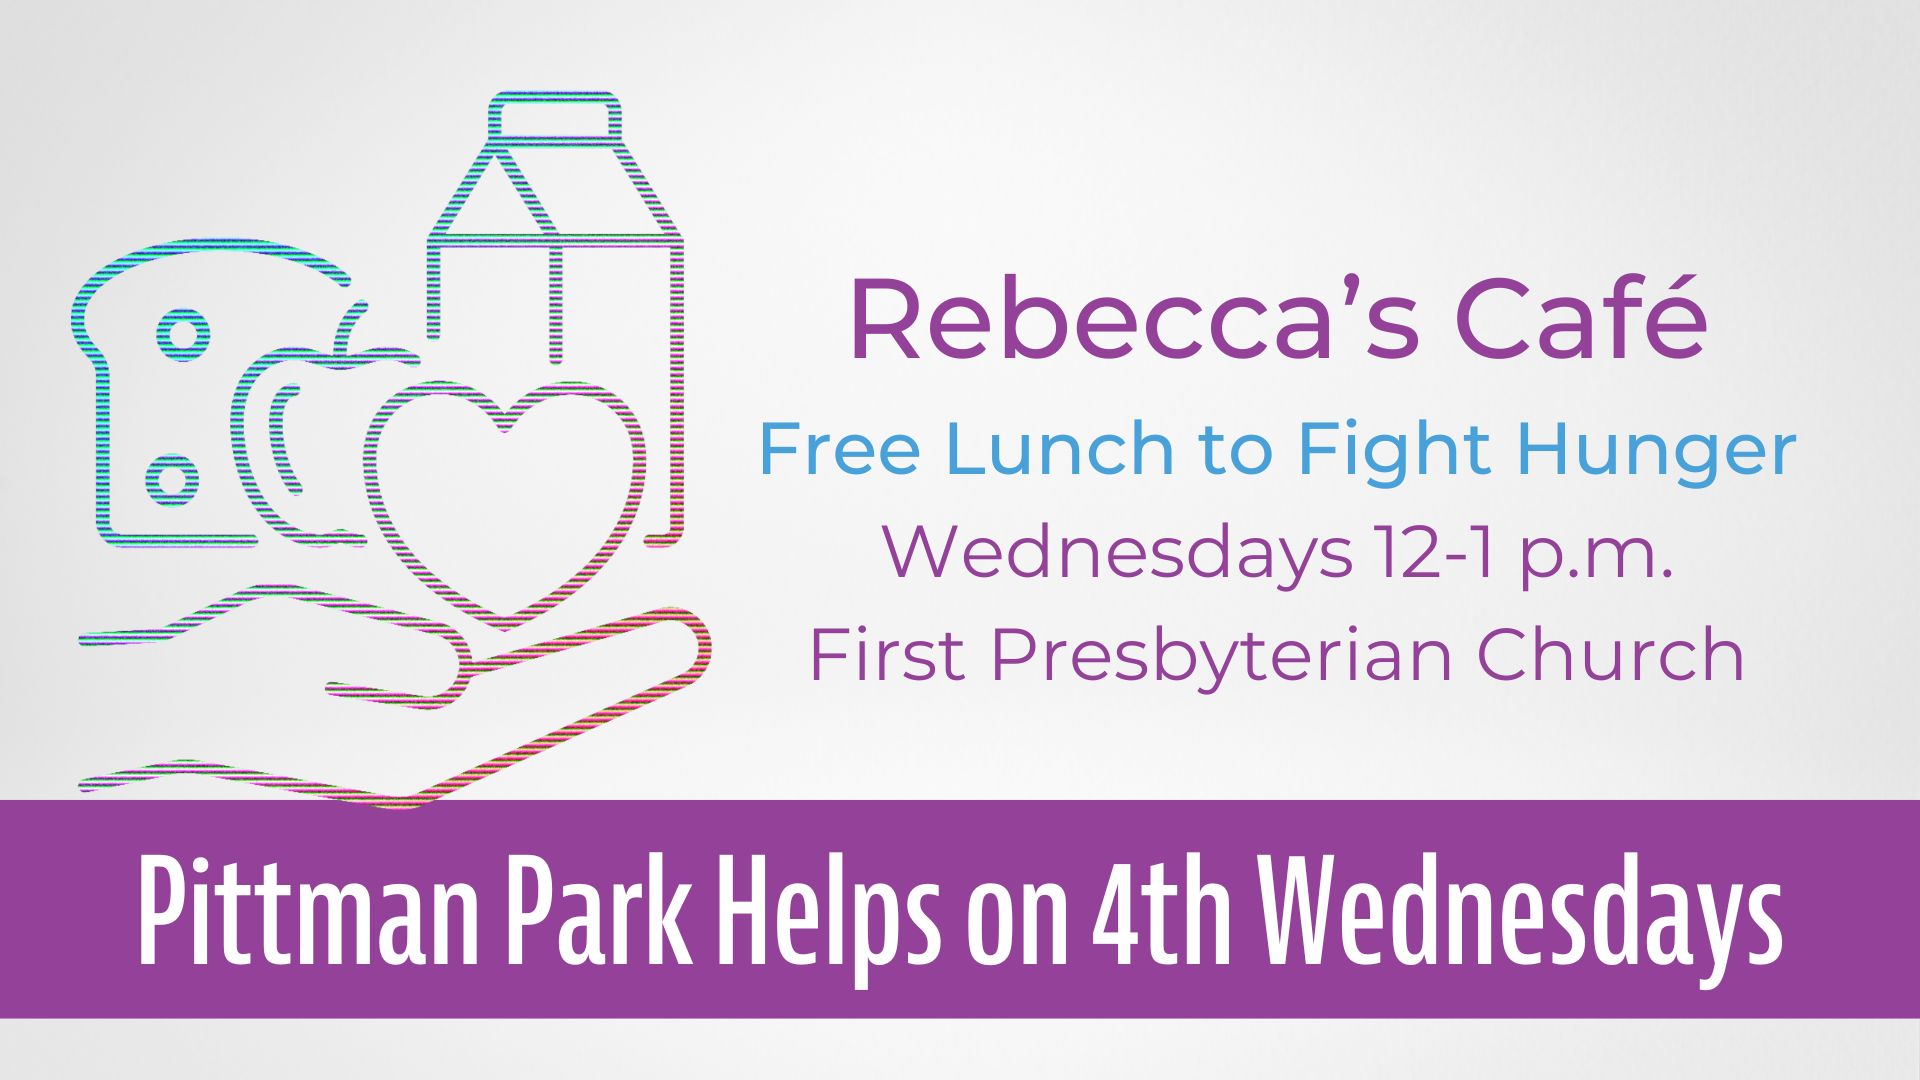 A Message from the Rebecca’s Cafe Coordinator